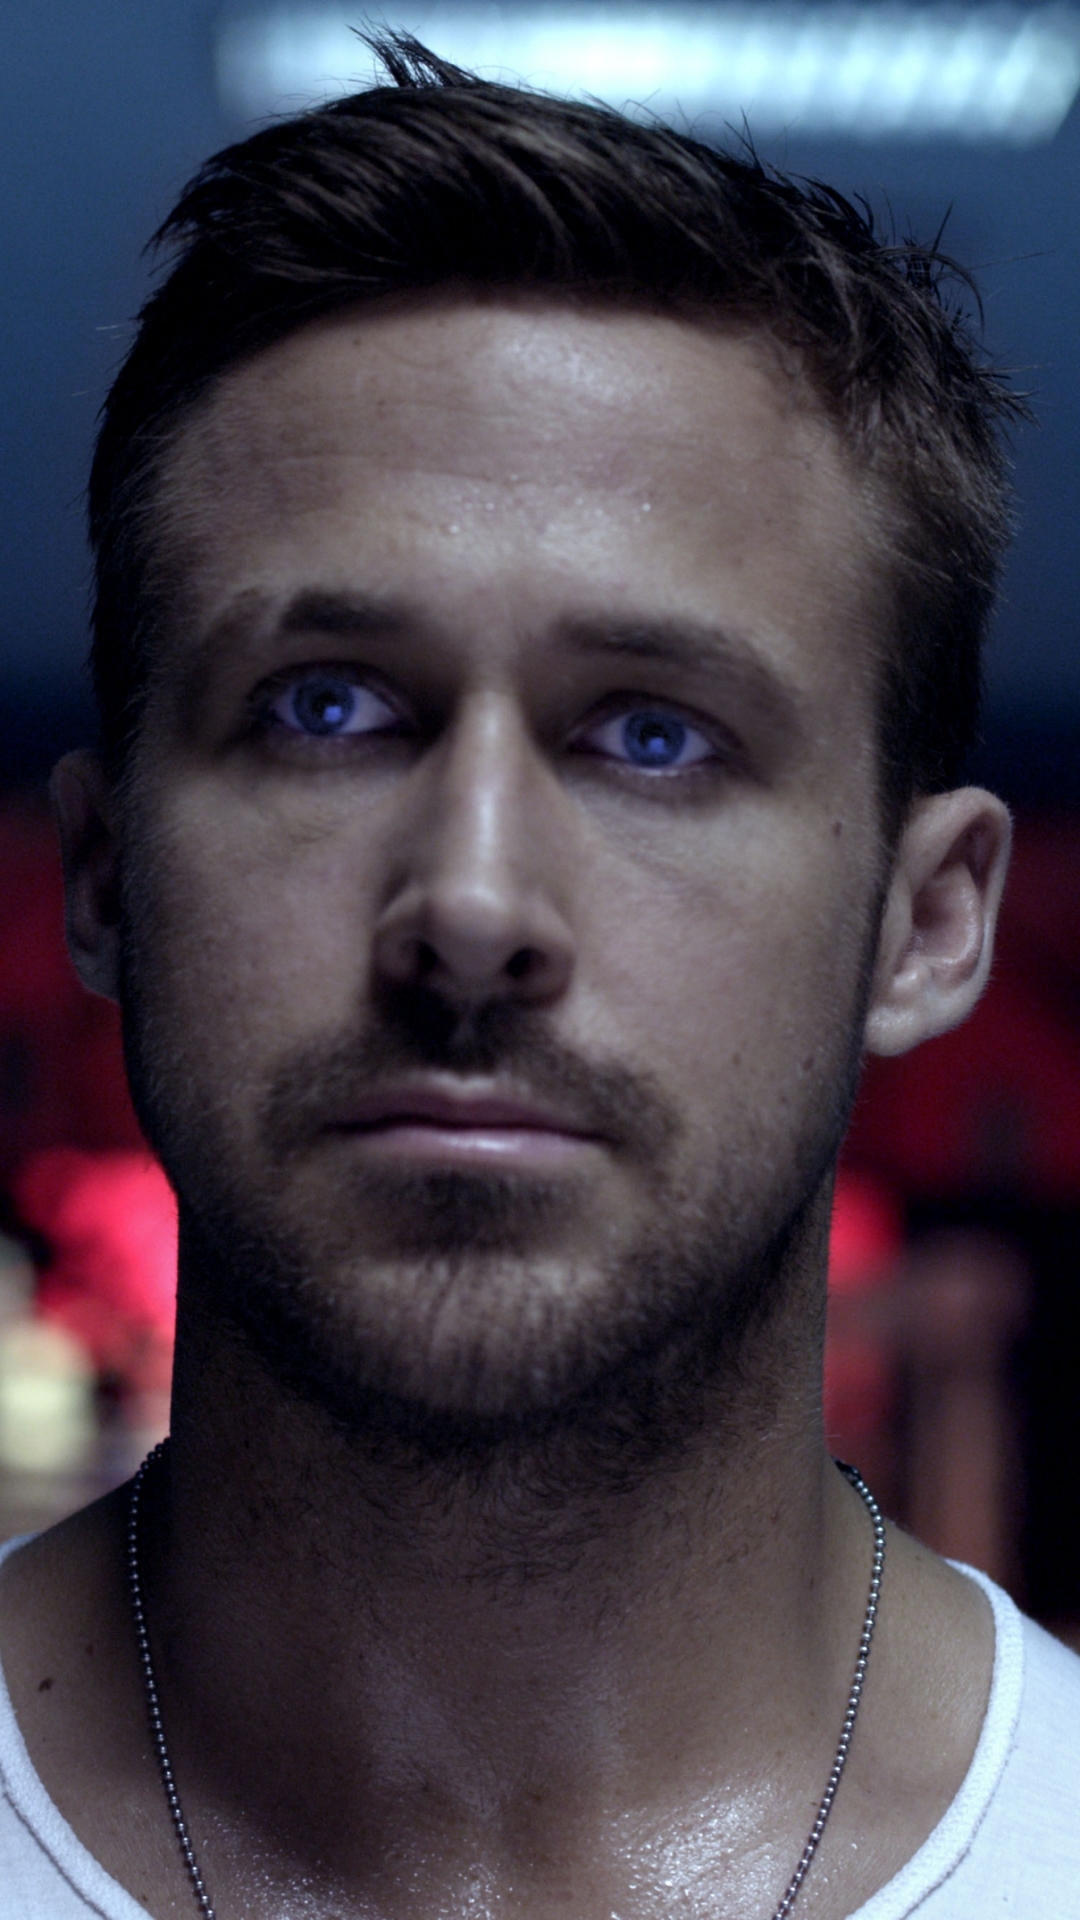 movie, only god forgives, ryan gosling lock screen backgrounds